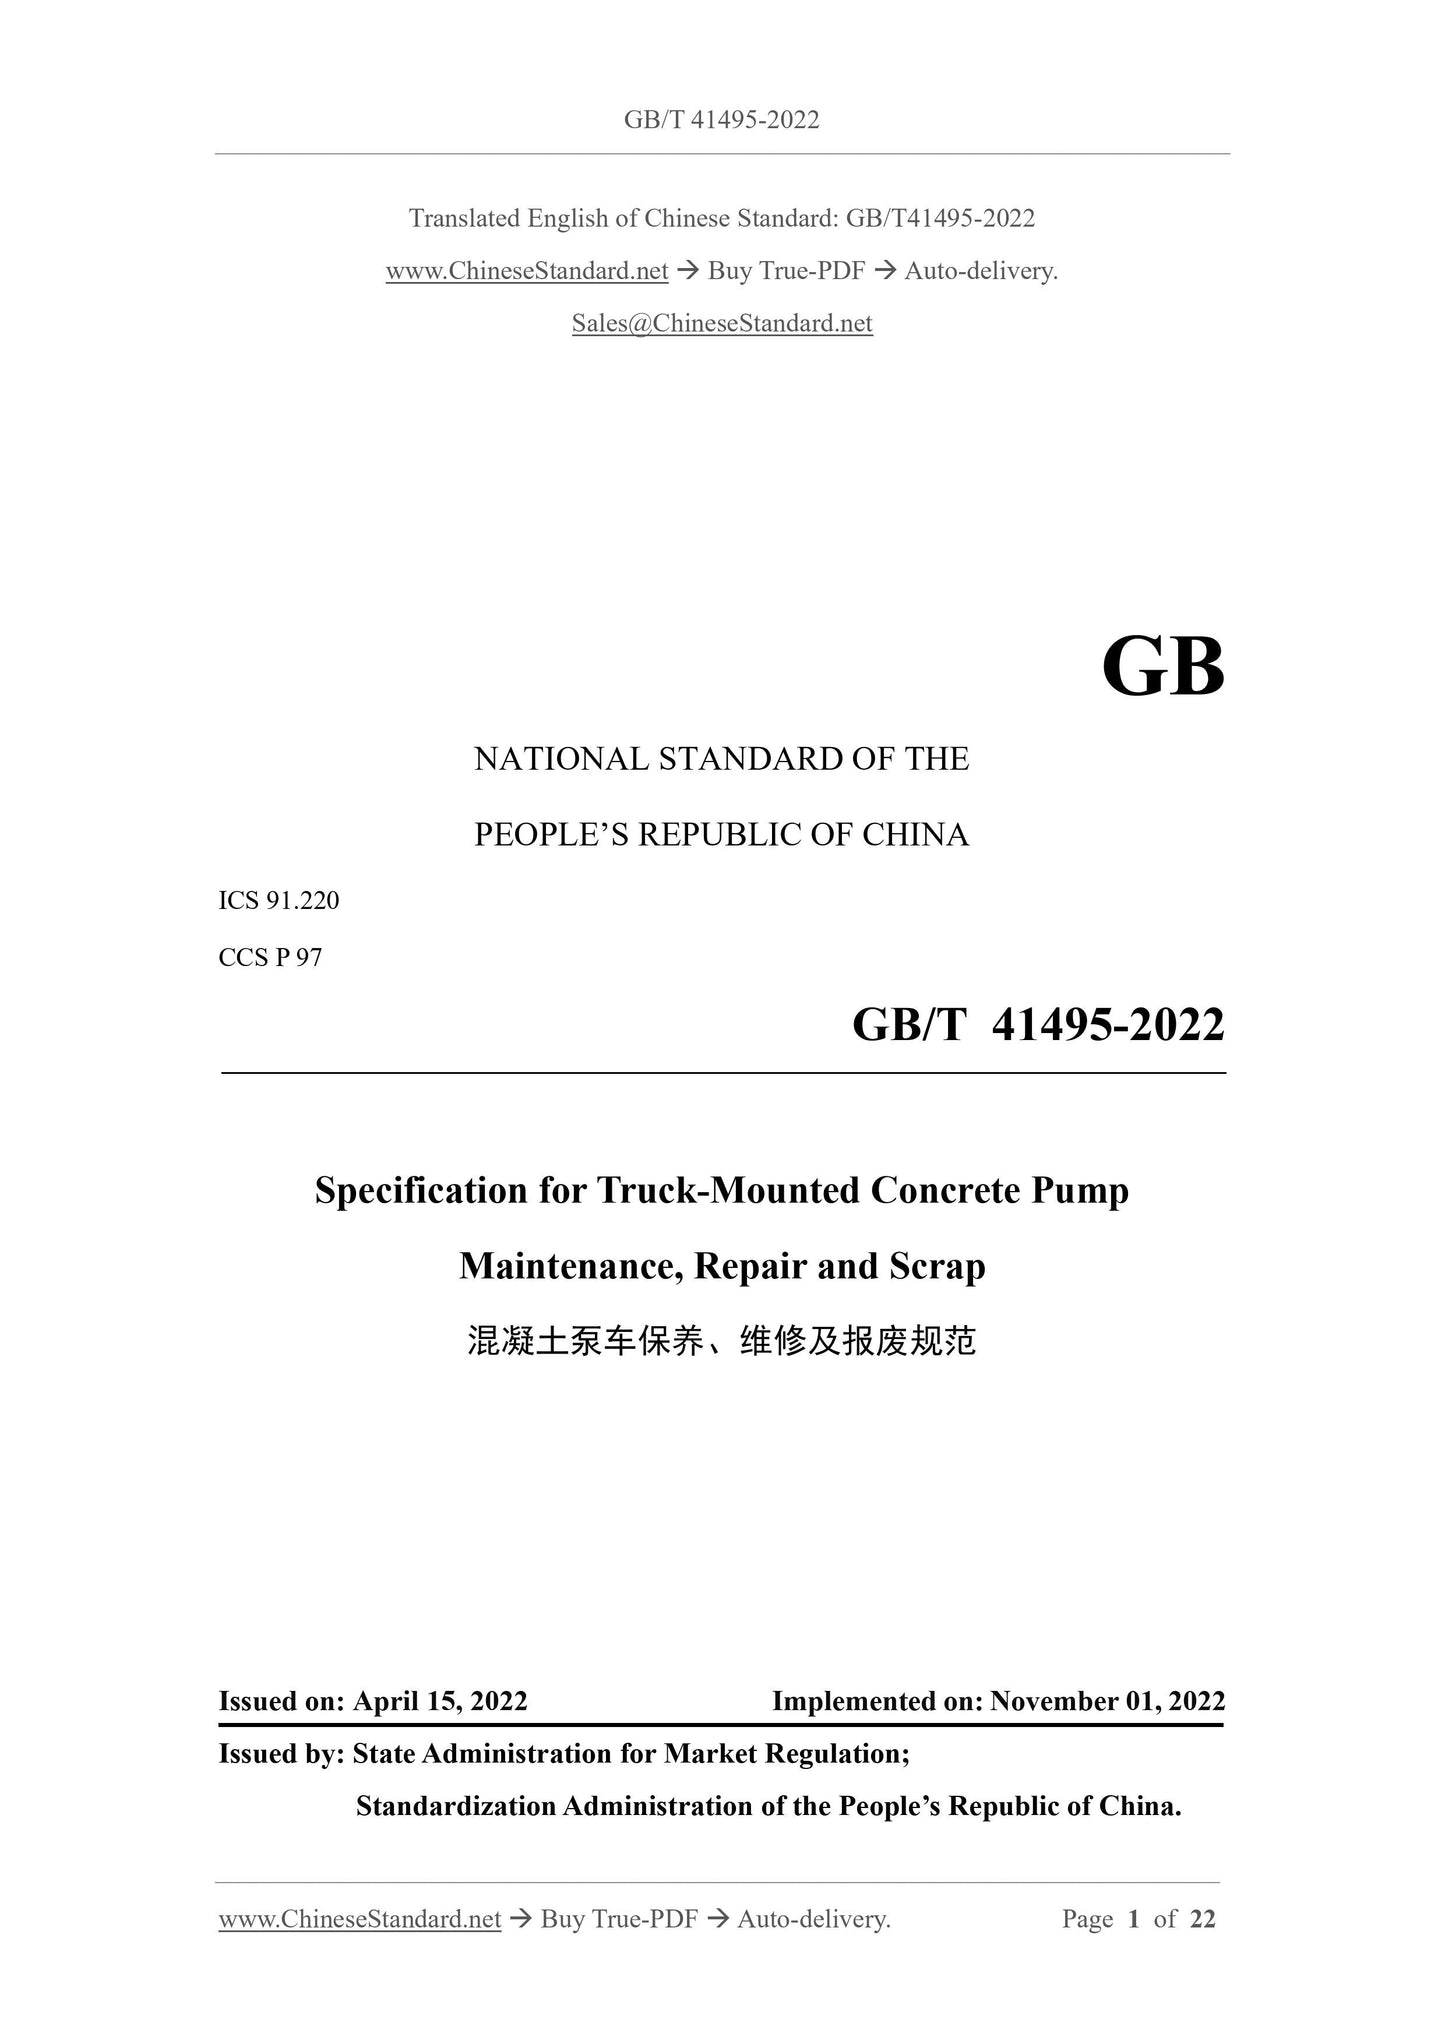 GB/T 41495-2022 Page 1